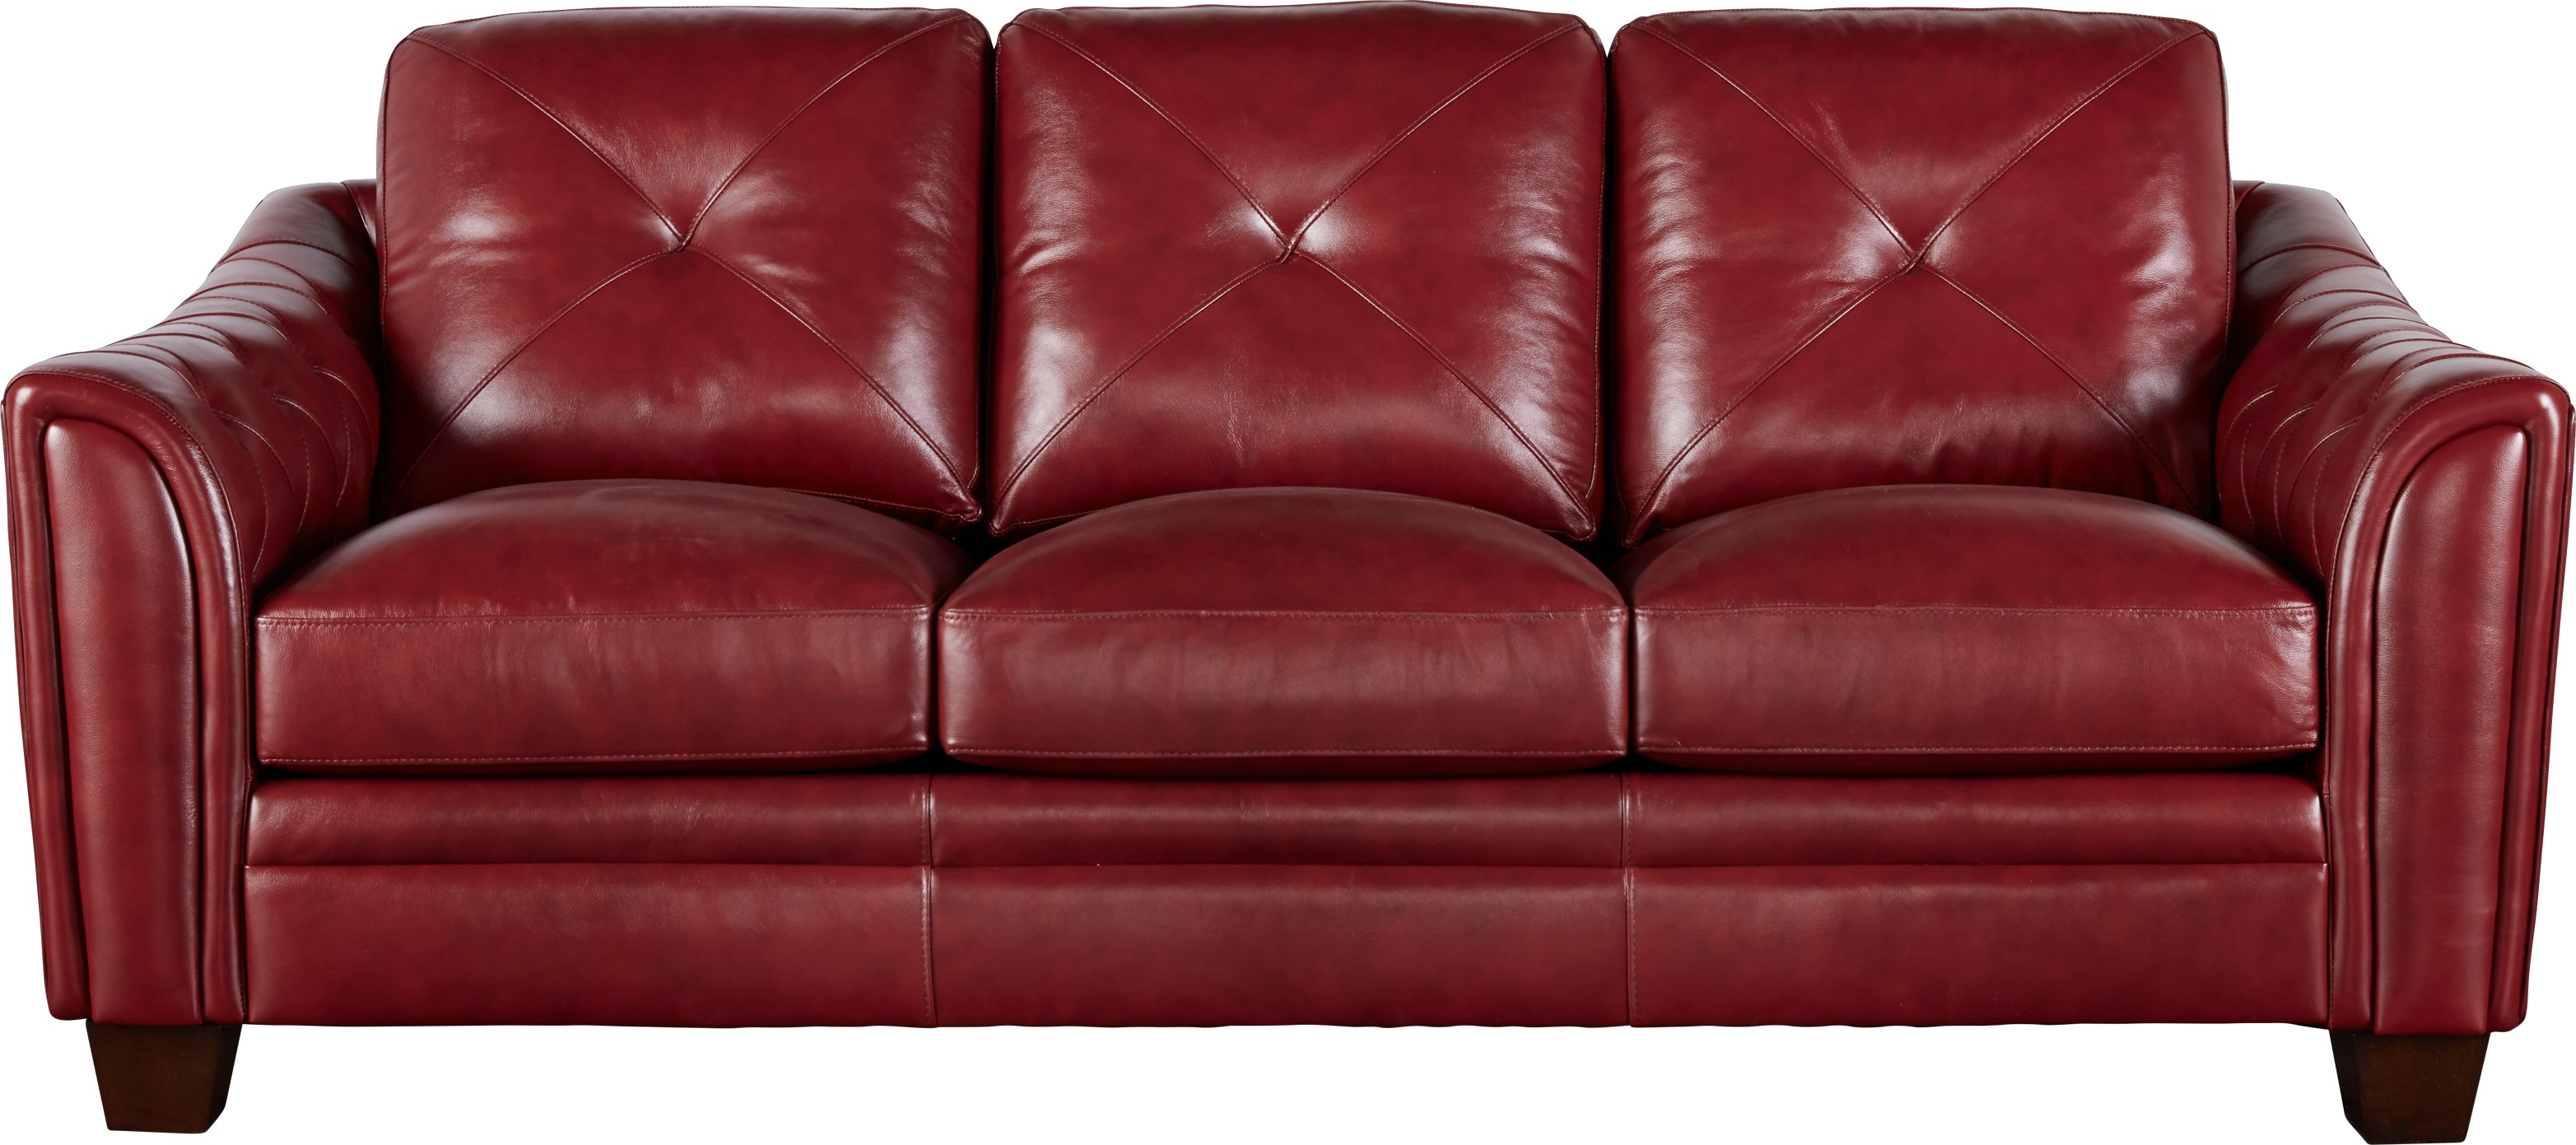 red leather sofa sears